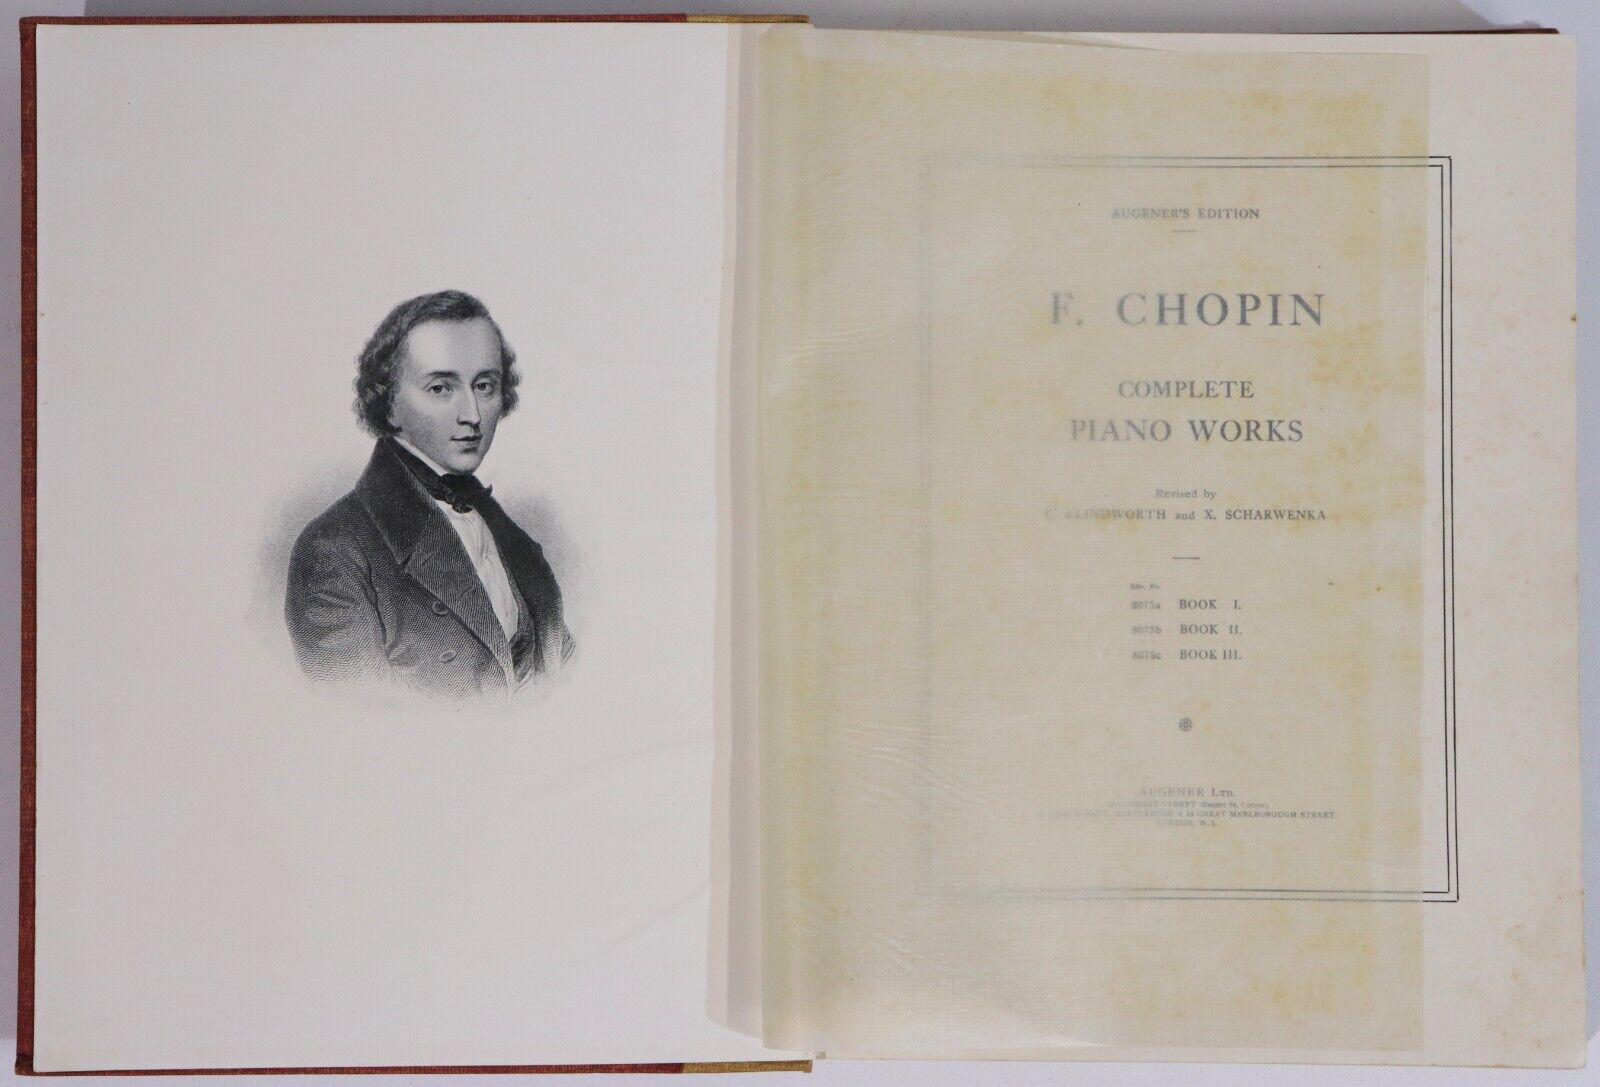 F. Chopin: Complete Piano Works - c1930 - Classical Music Reference Book